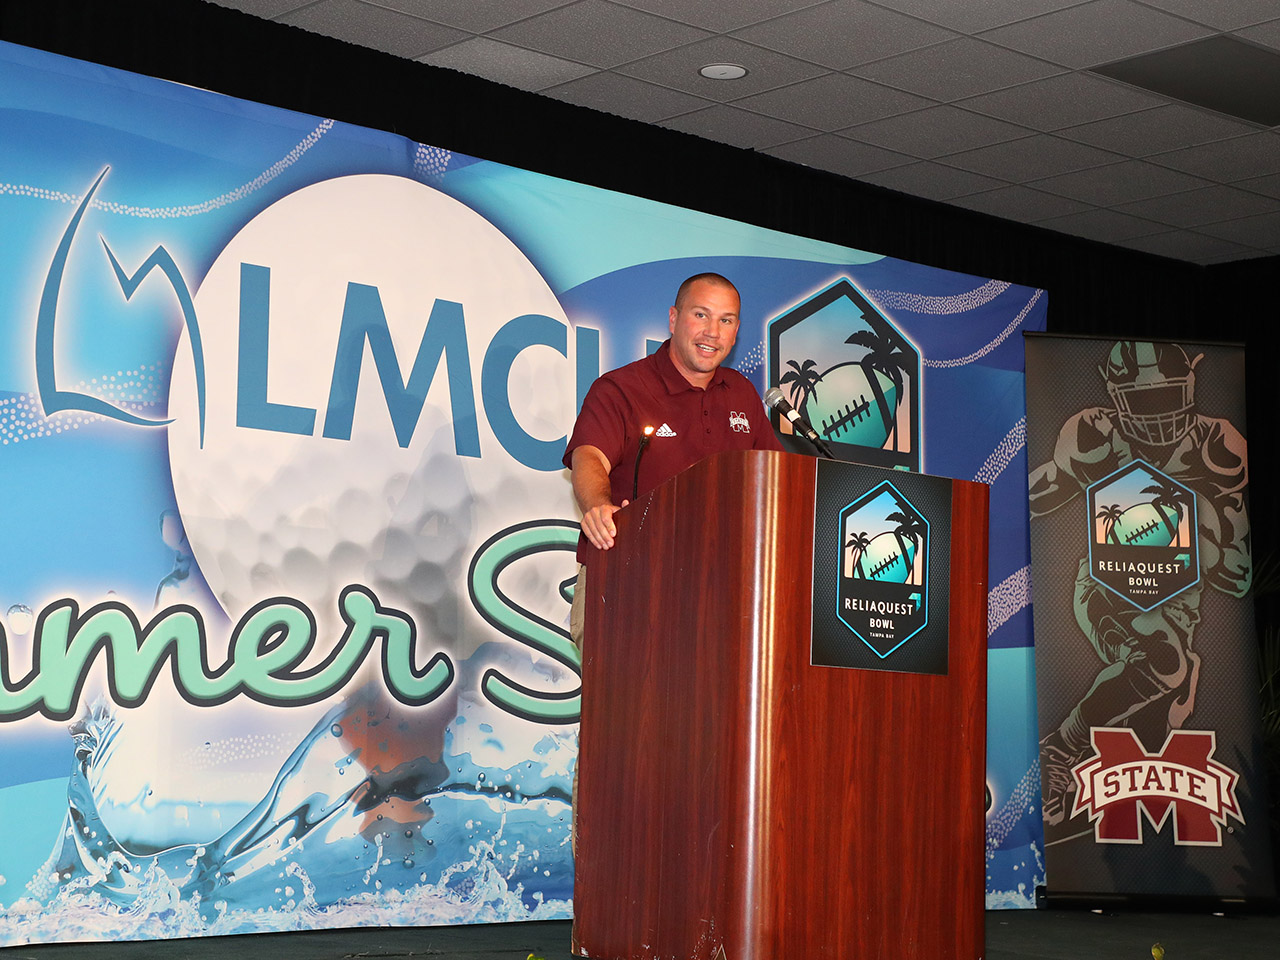 Mississippi State Coach Zach Arnett was the special guest speaker at the banquet